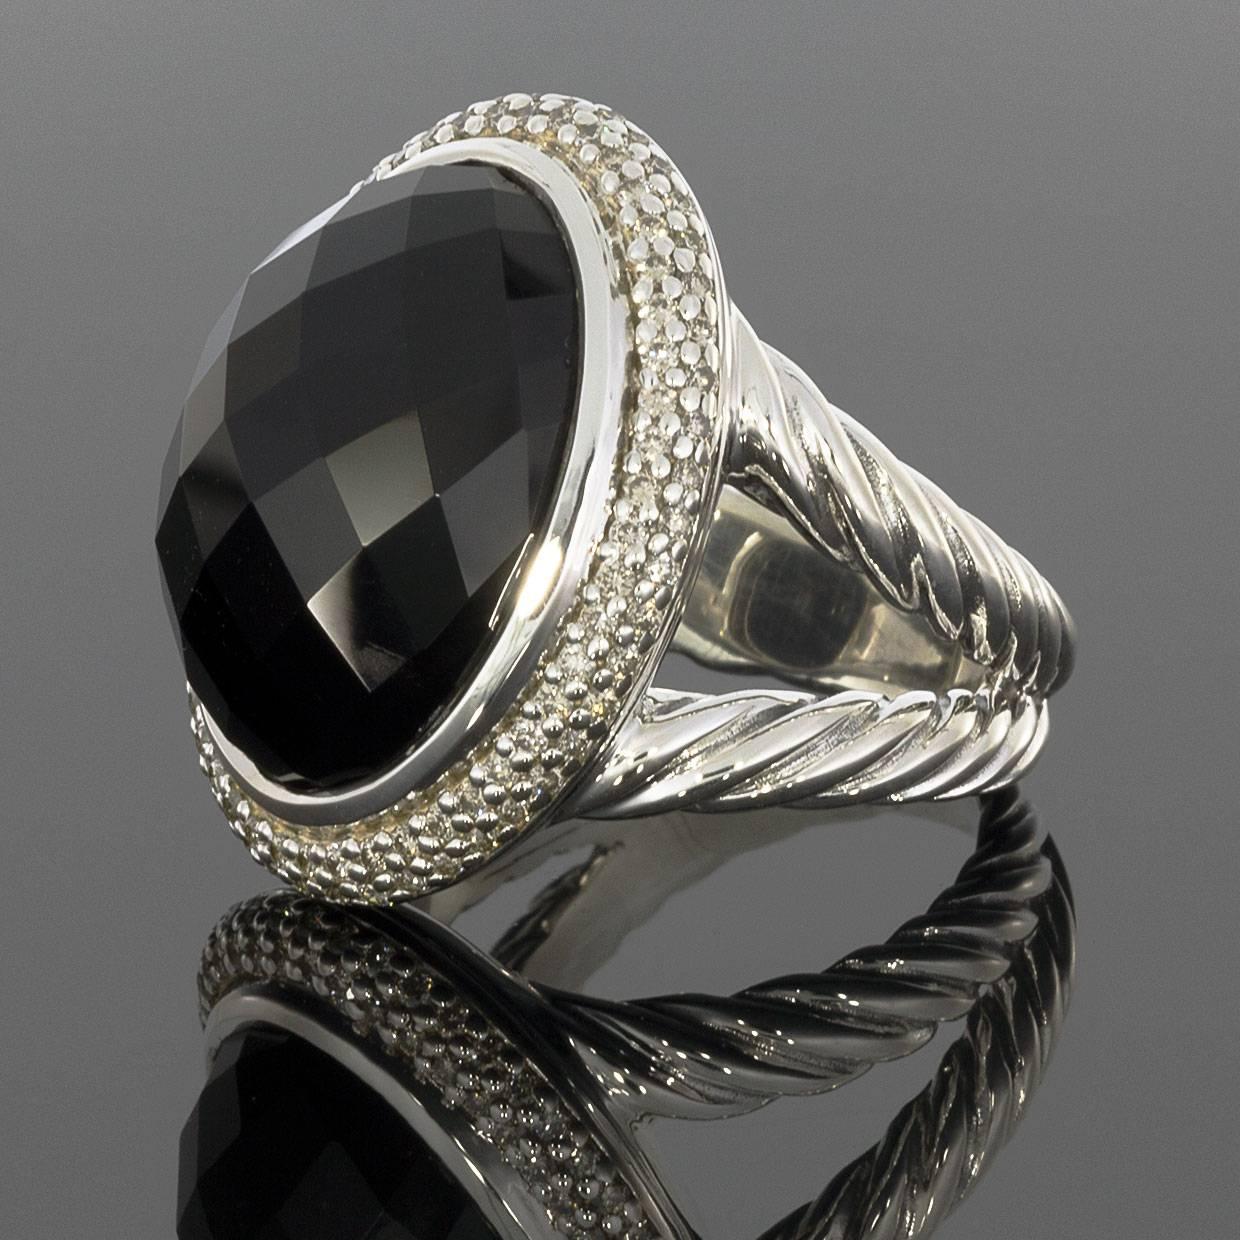 In 1980, sculptor-turned-jeweler David Yurman introduced his eponymous collection. His artistic, sculptural pieces were a refreshing new interpretation, but David Yurman truly changed the trends of fashion with his now-classic, twisted,